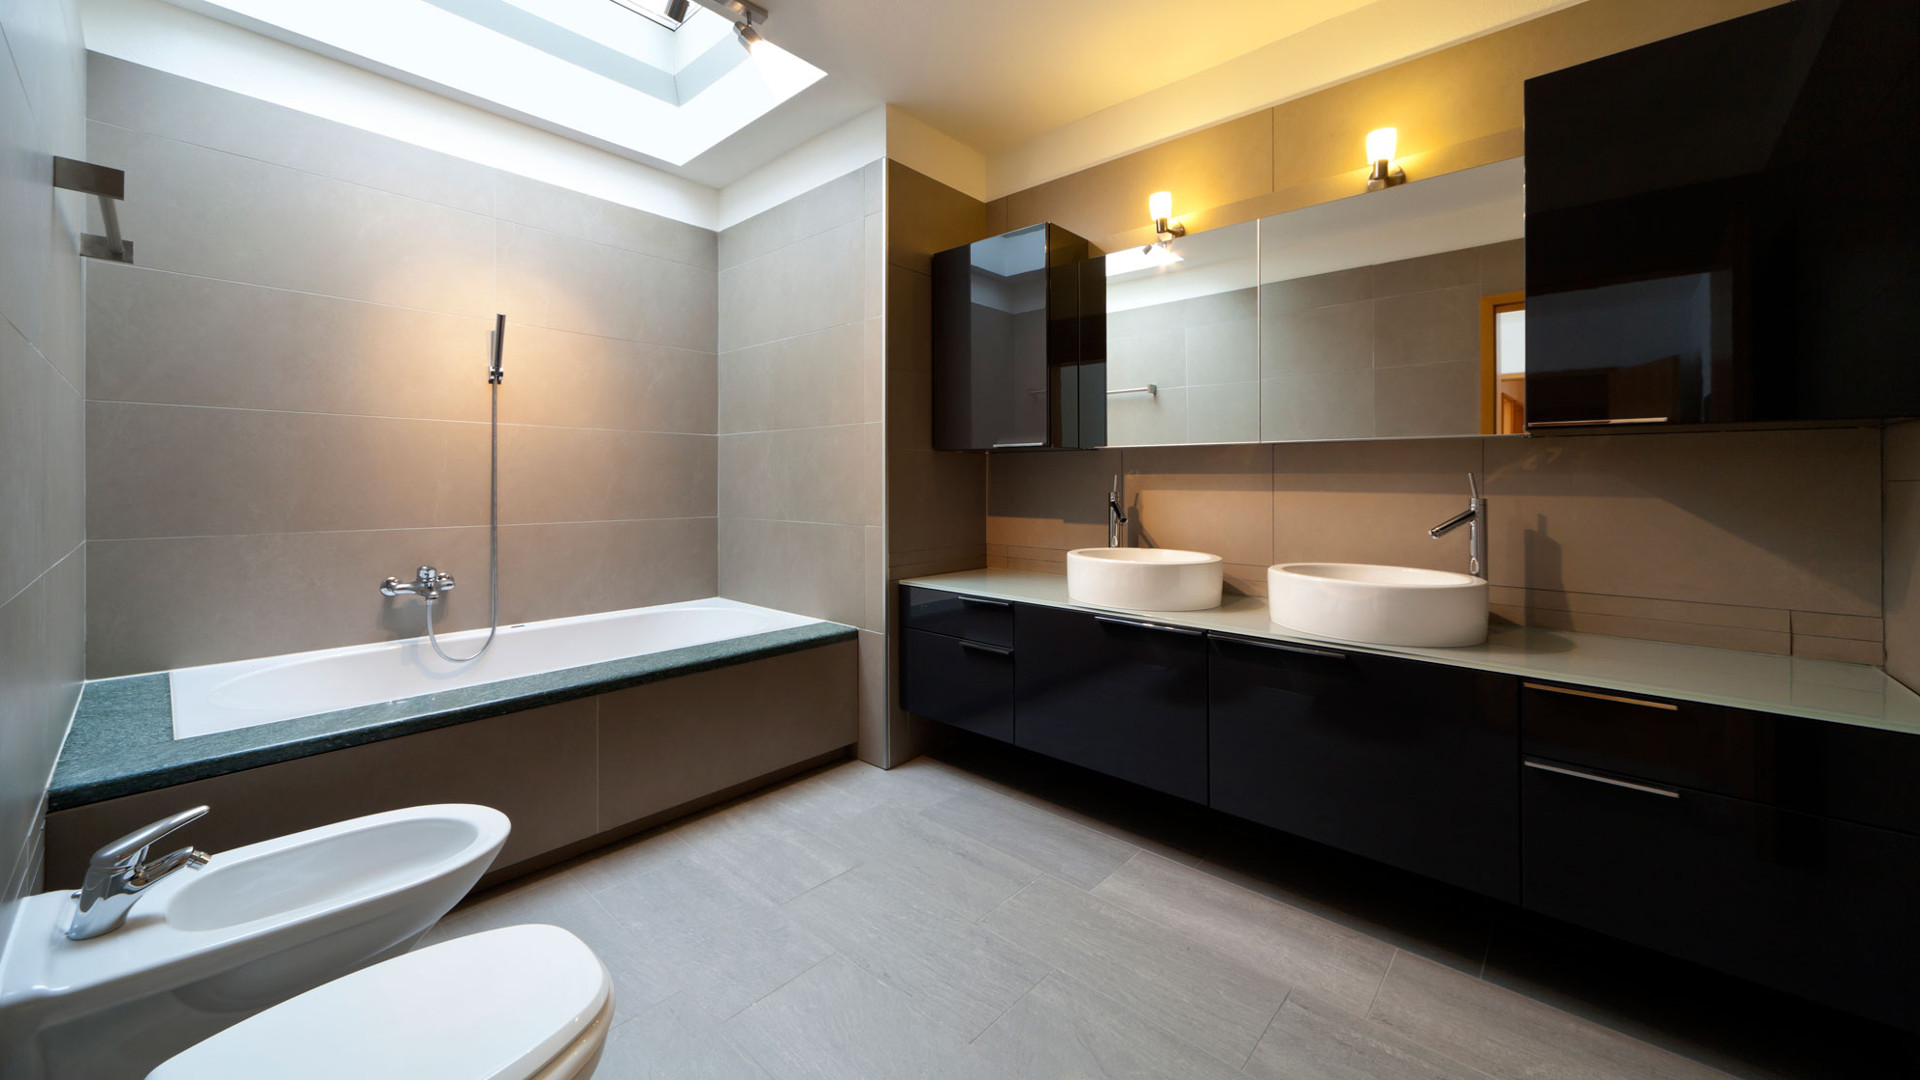 Carpentersville and surrounding areas Bathroom Remodeling